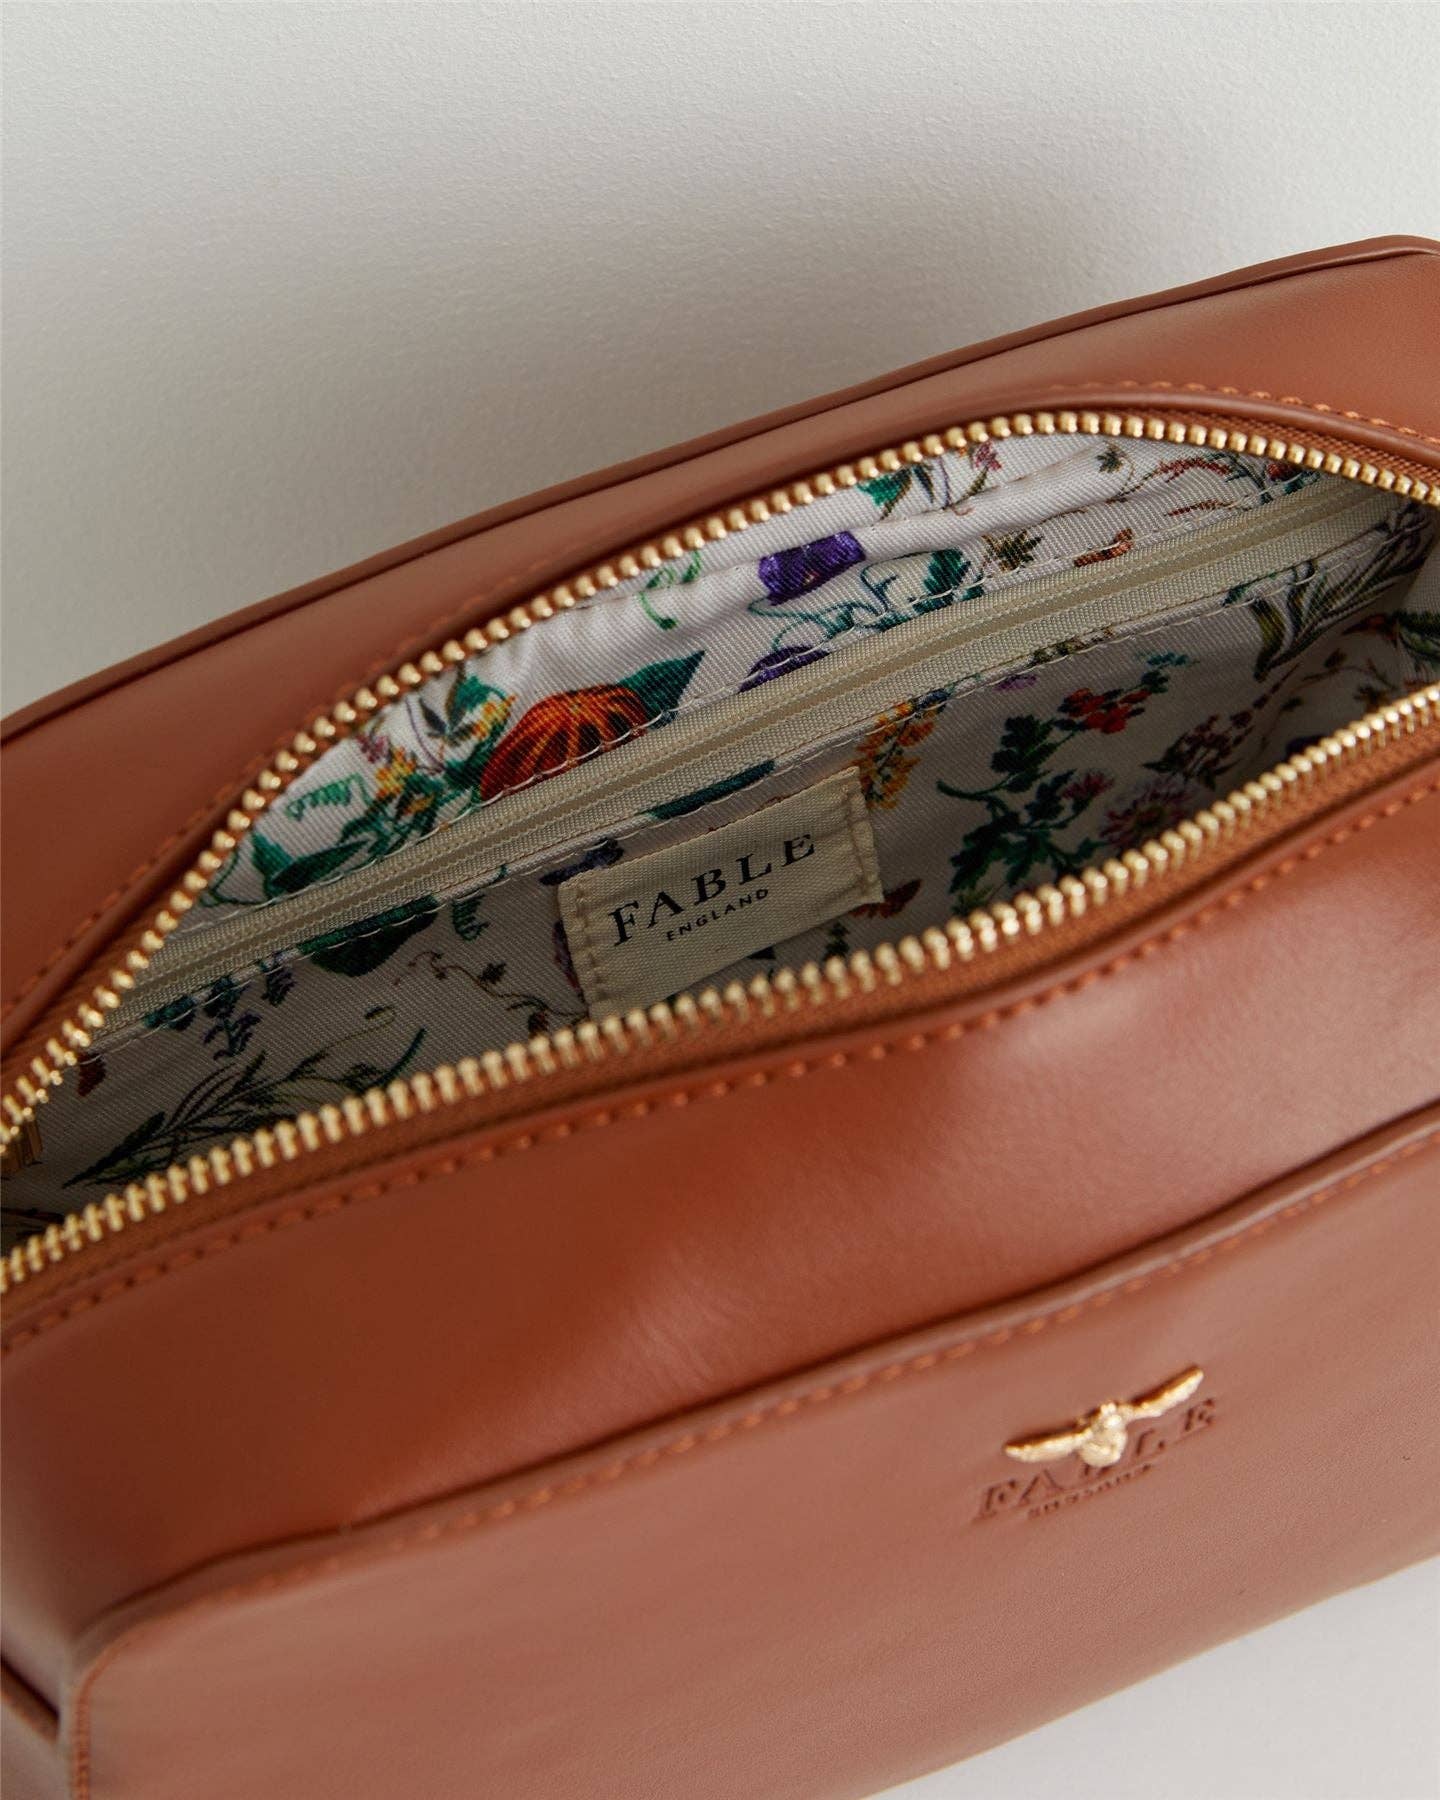 Fable England Camera Bag with Printed Strap in Tan. Fable England where to buy. Enniskillen Shopping Center.